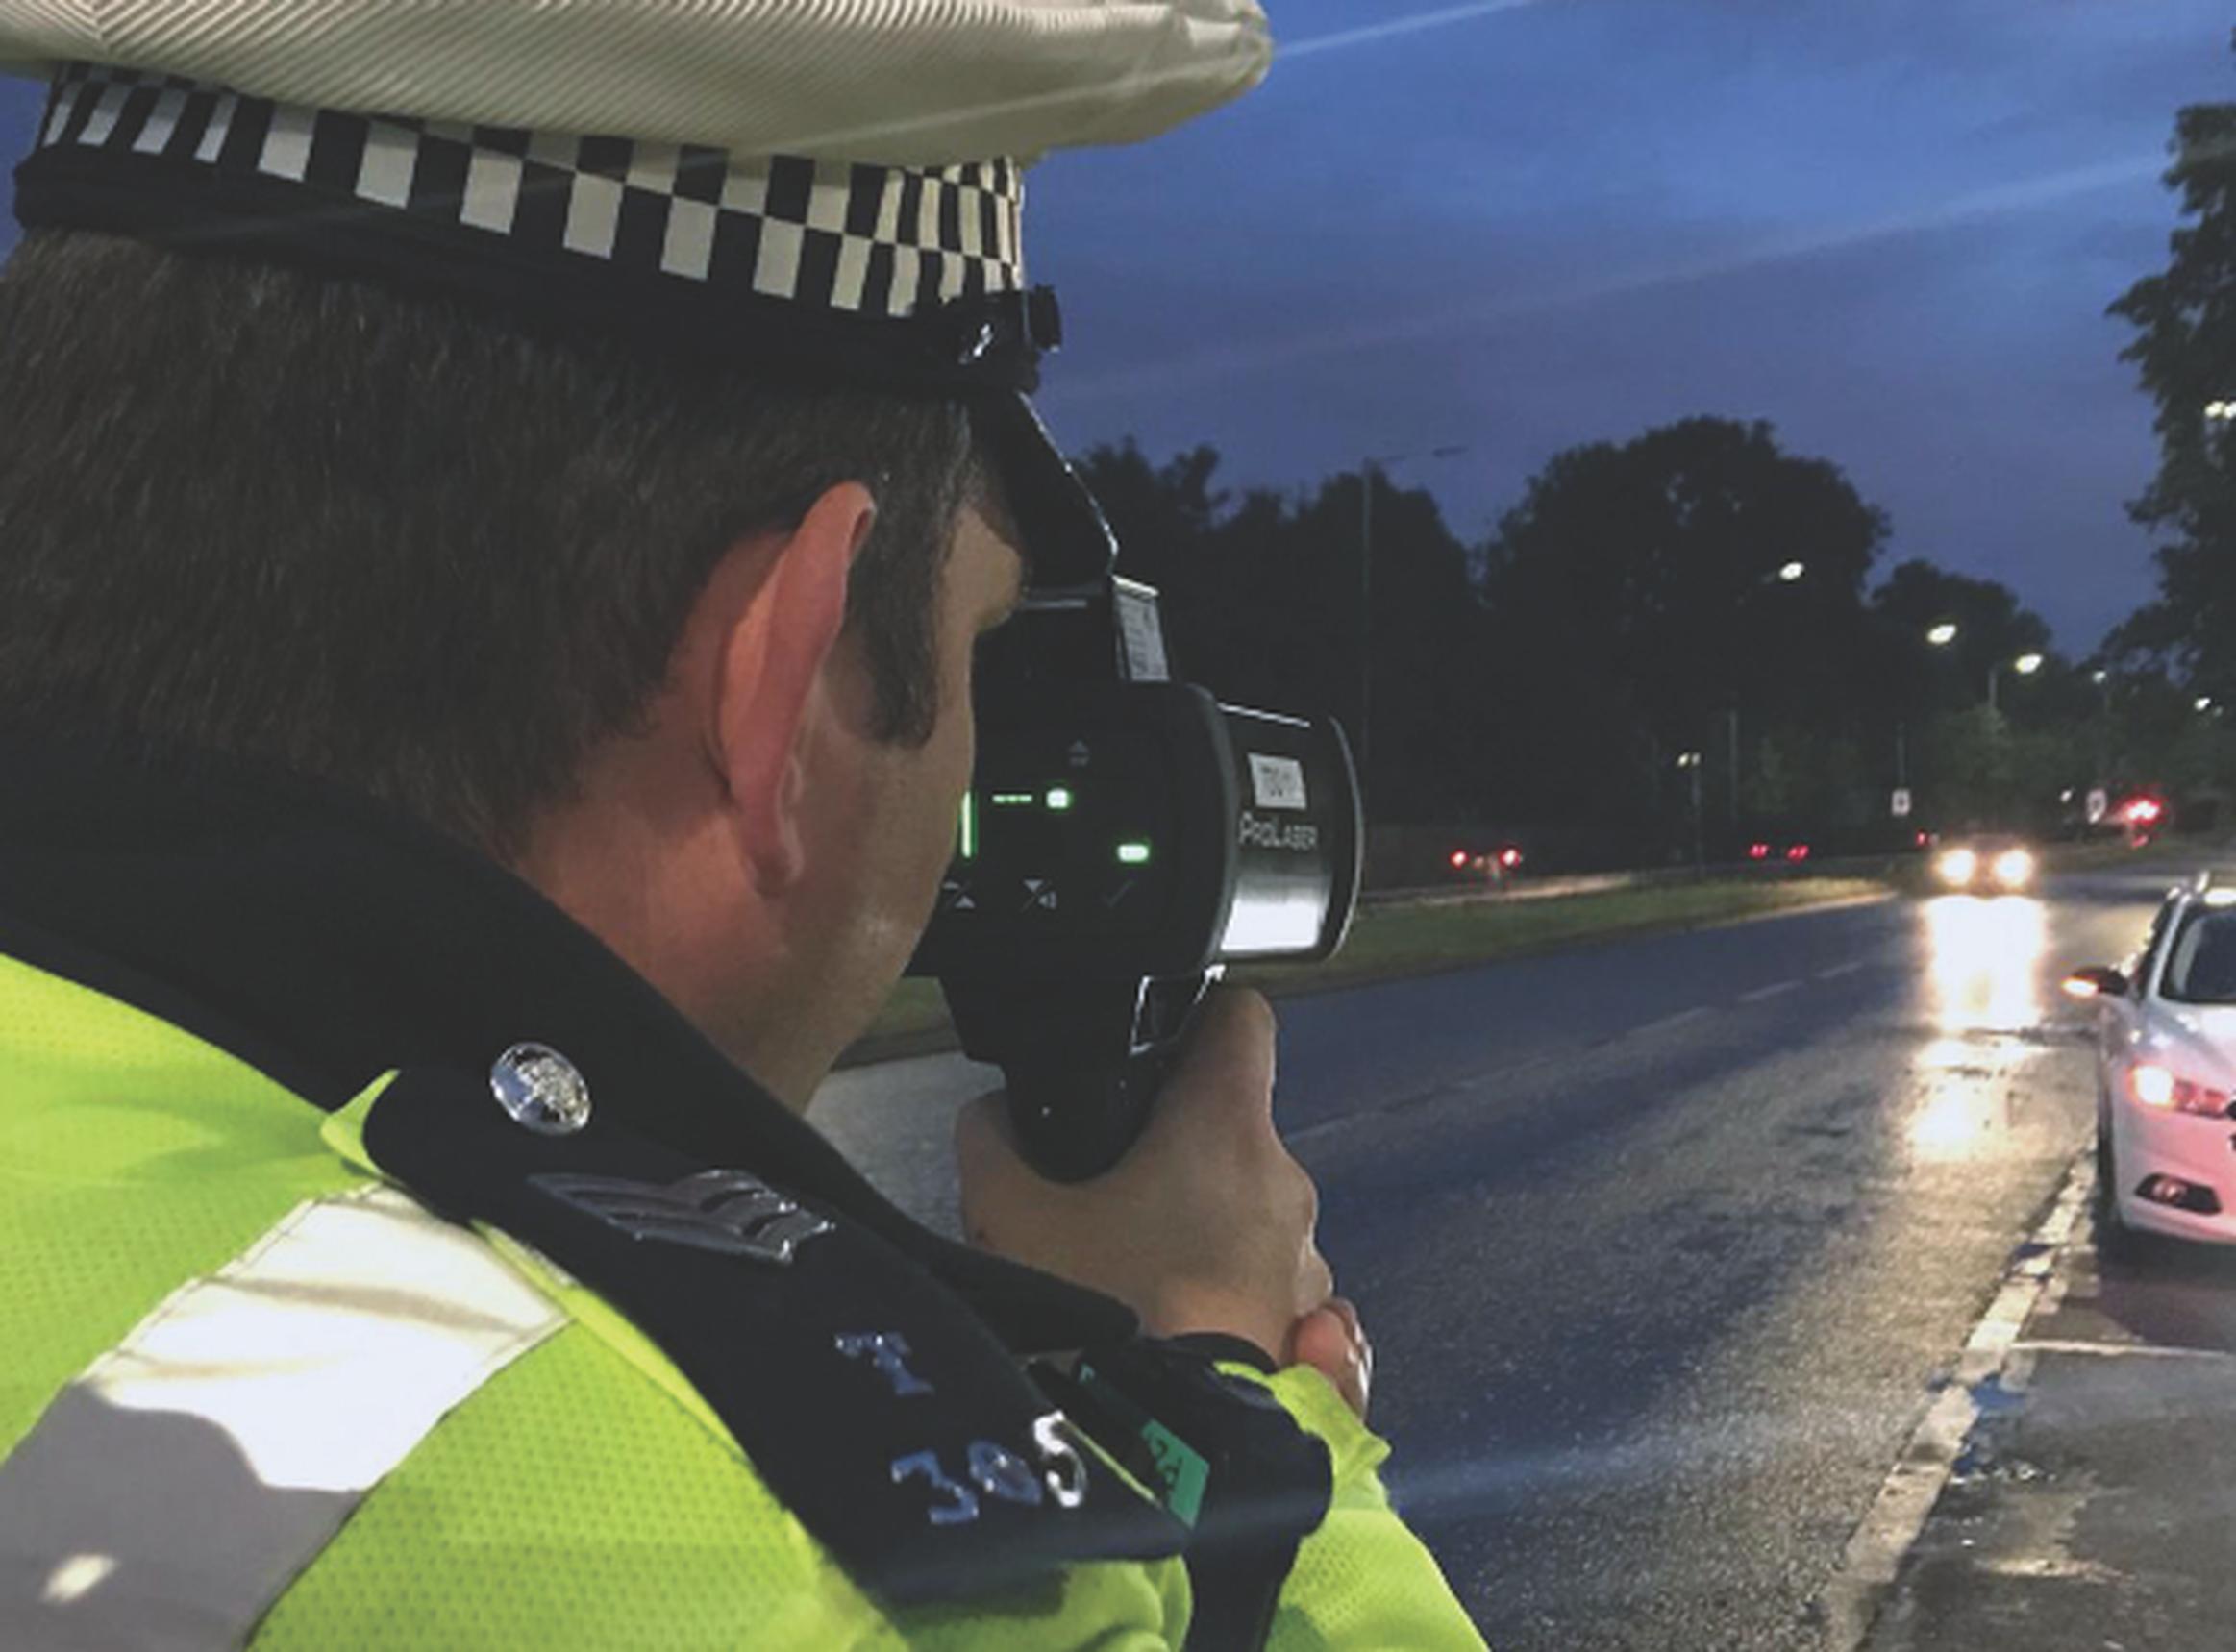 Drivers caught speeding during the early weeks of lockdown did not expect officers to be patrolling near-deserted roads